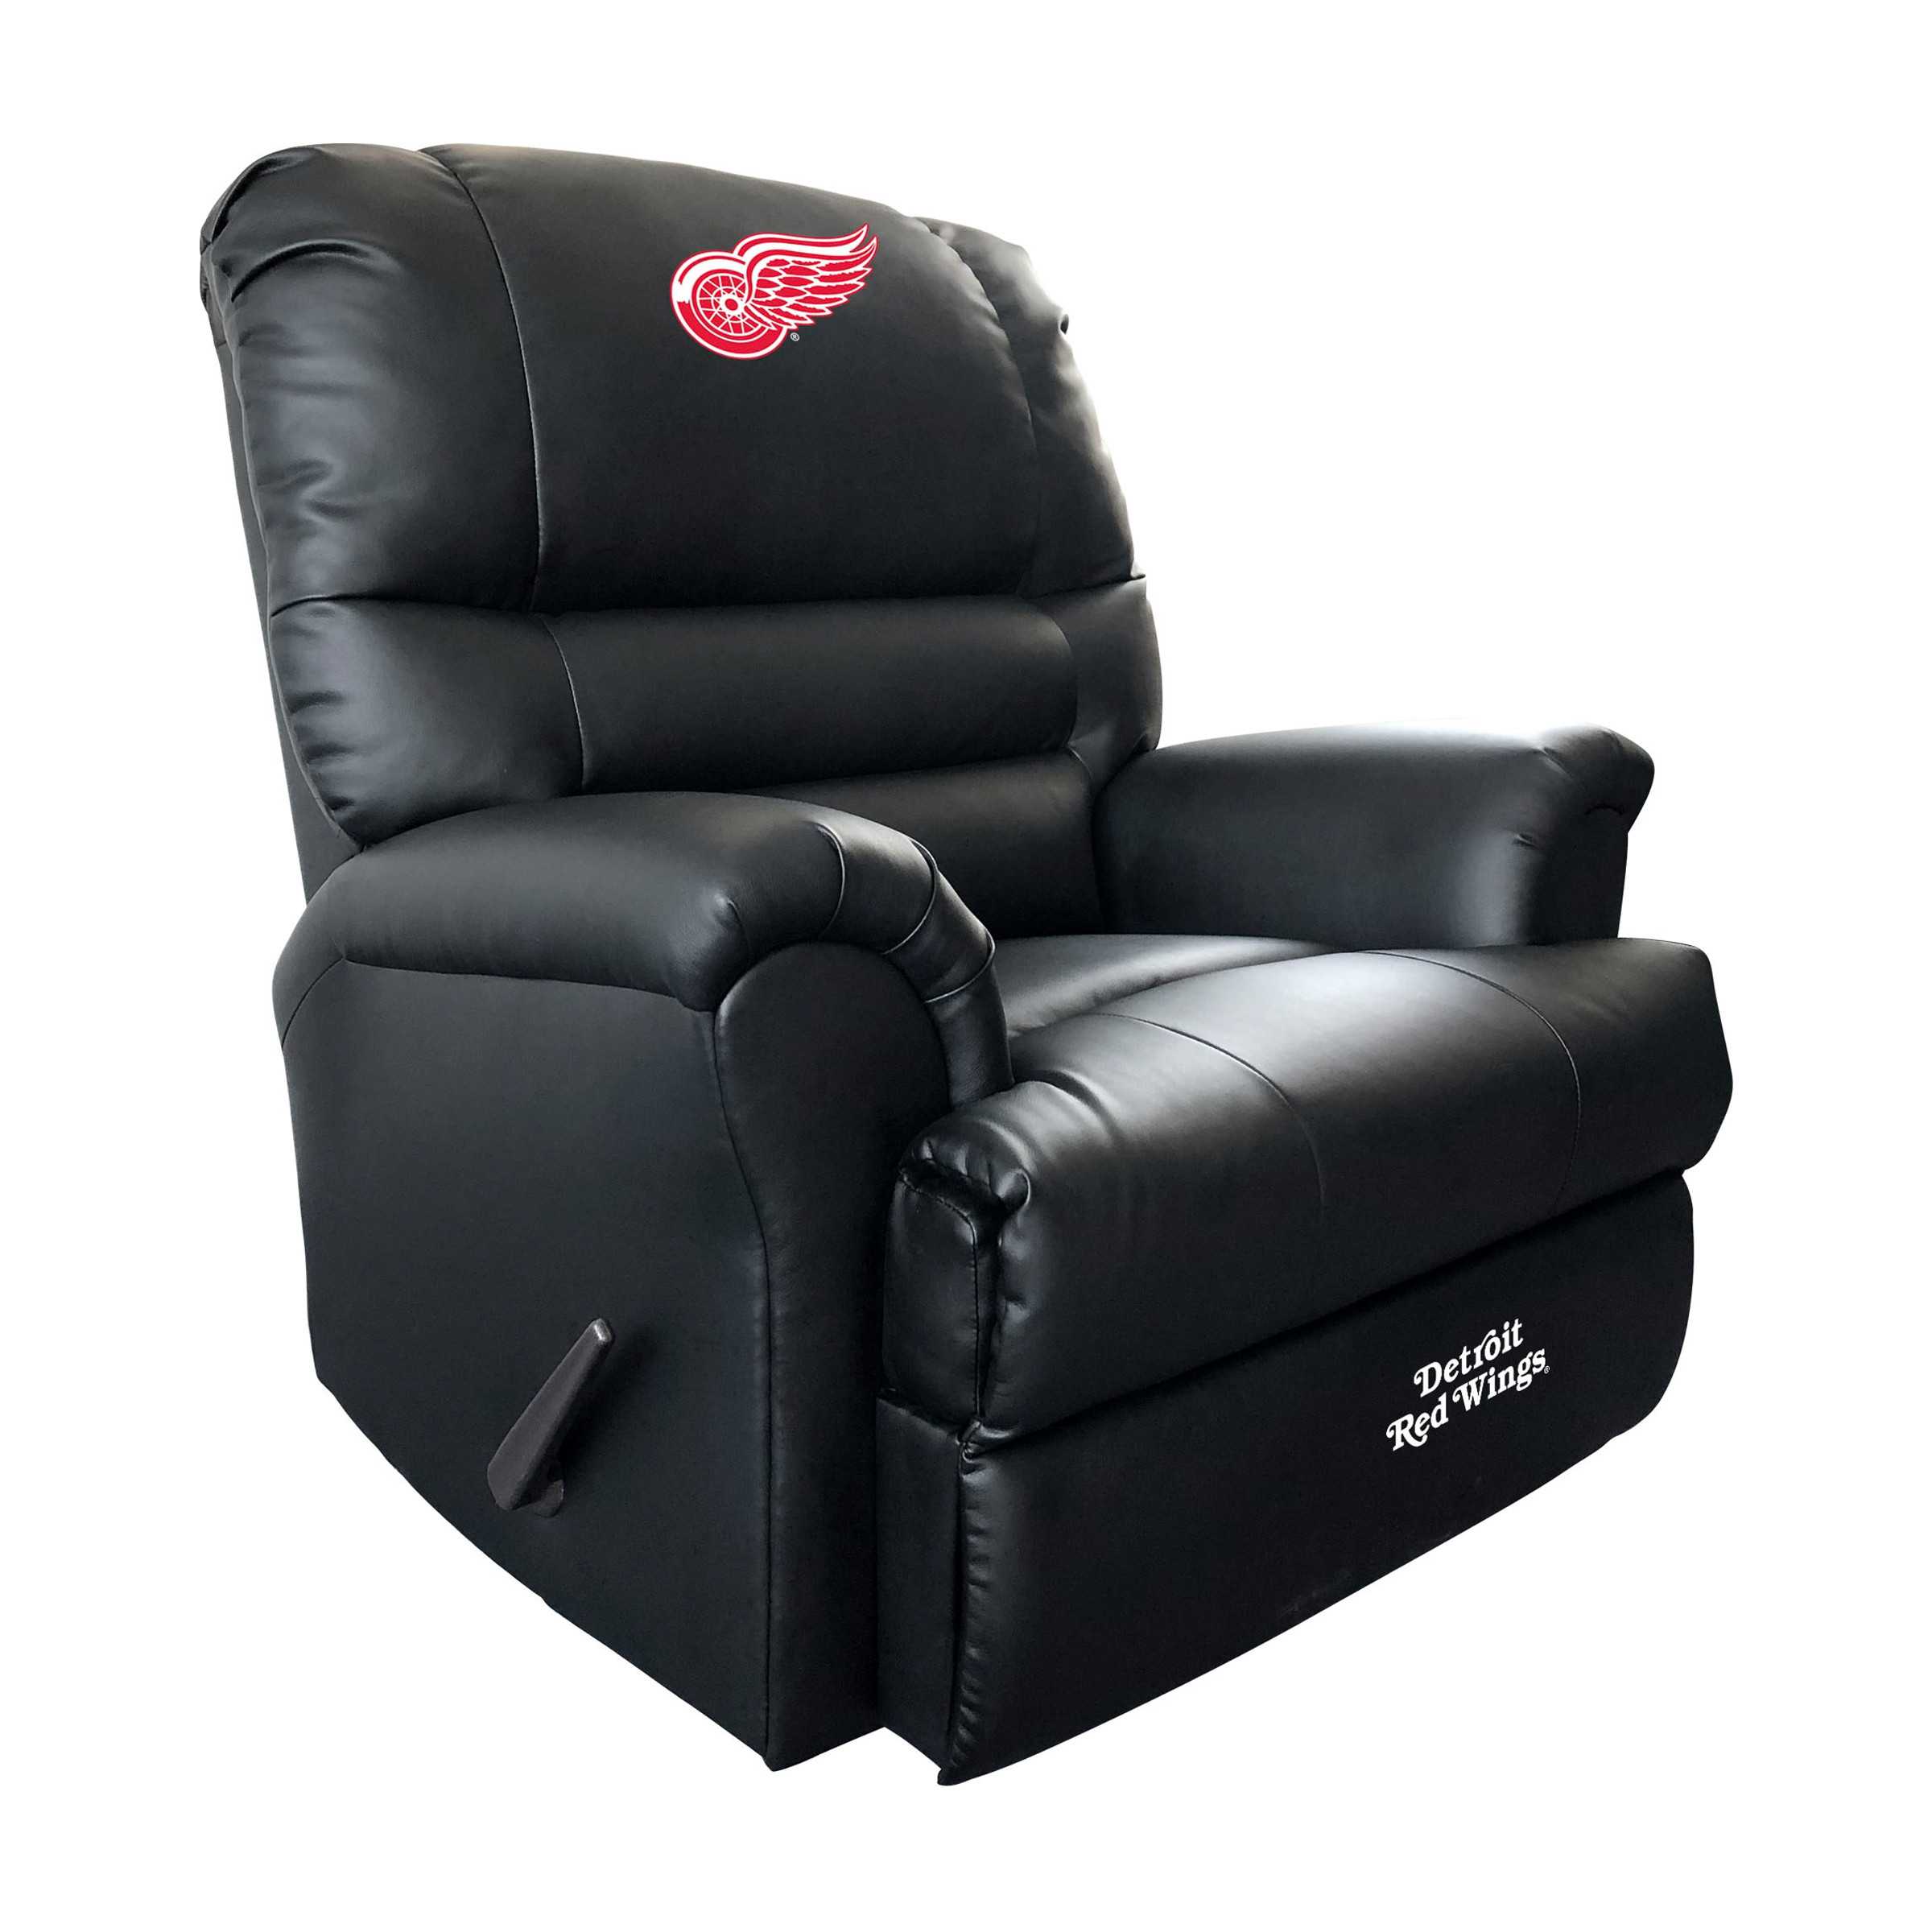 DETROIT RED WINGS SPORTS RECLINER